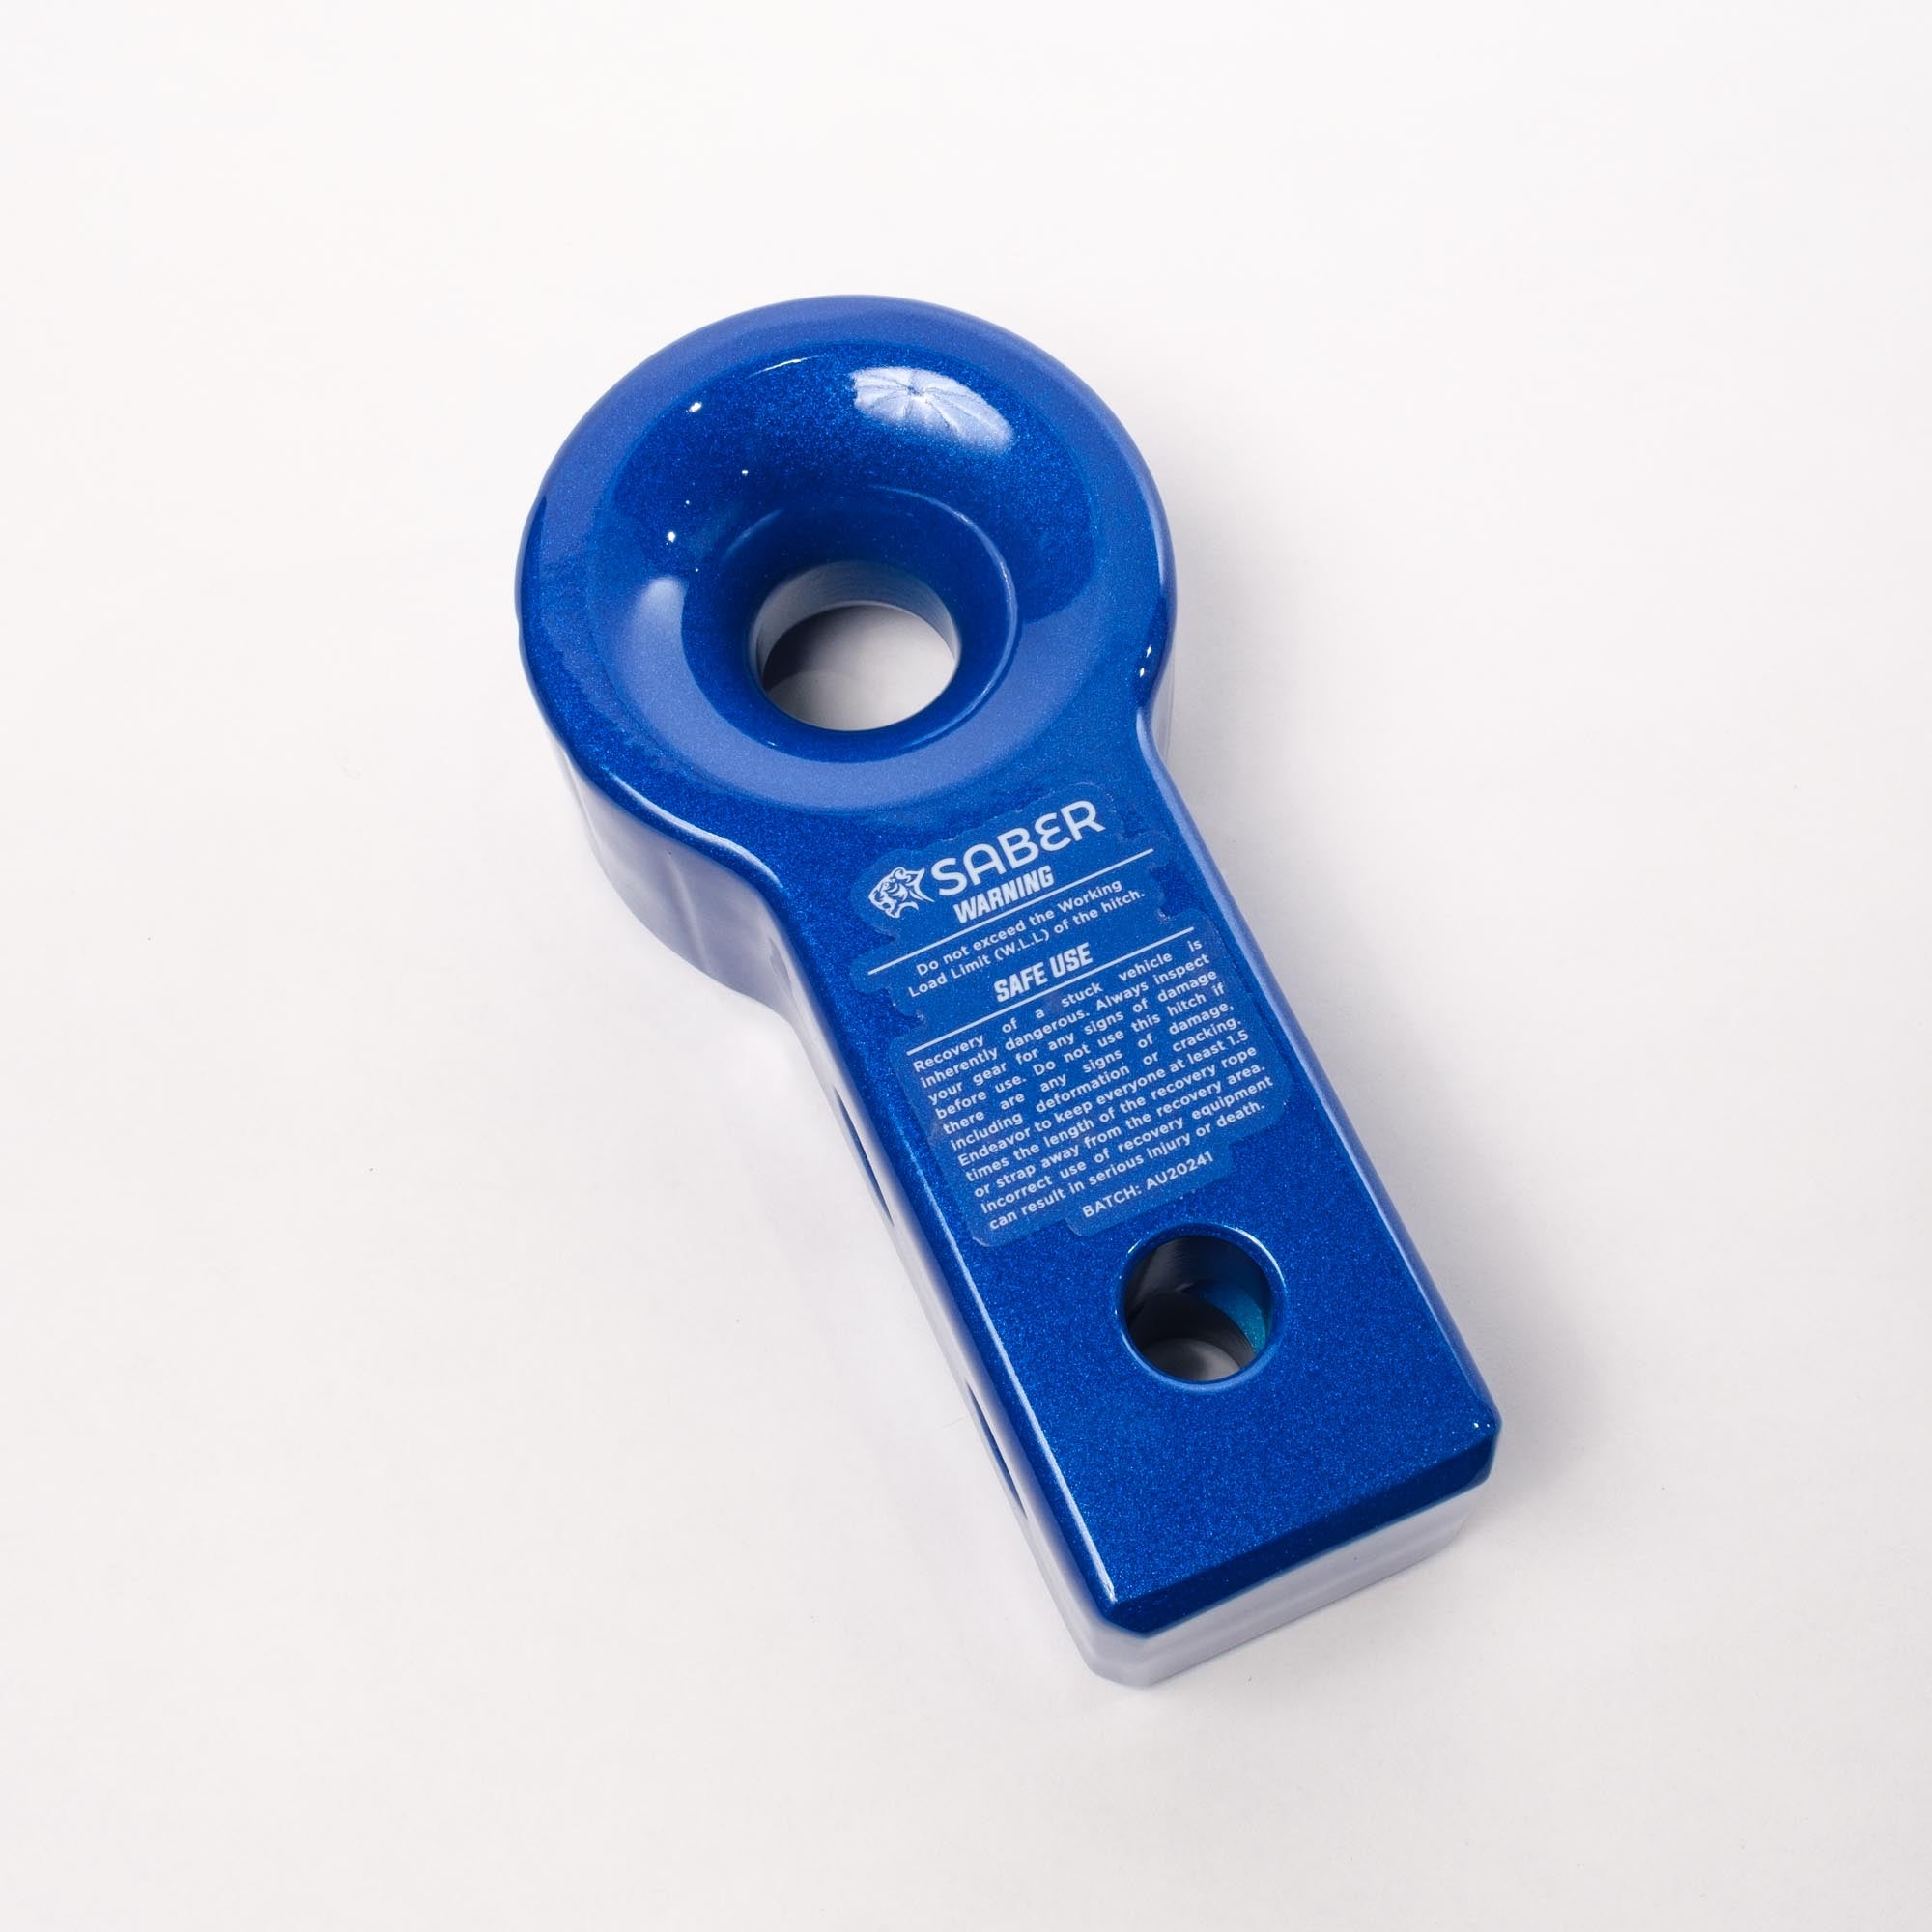 7075 Saber Alloy Recovery Hitch - Blue Prismatic - 7075 Soft Shackle Only Aluminium Recovery Hitch - Blue Prismatic